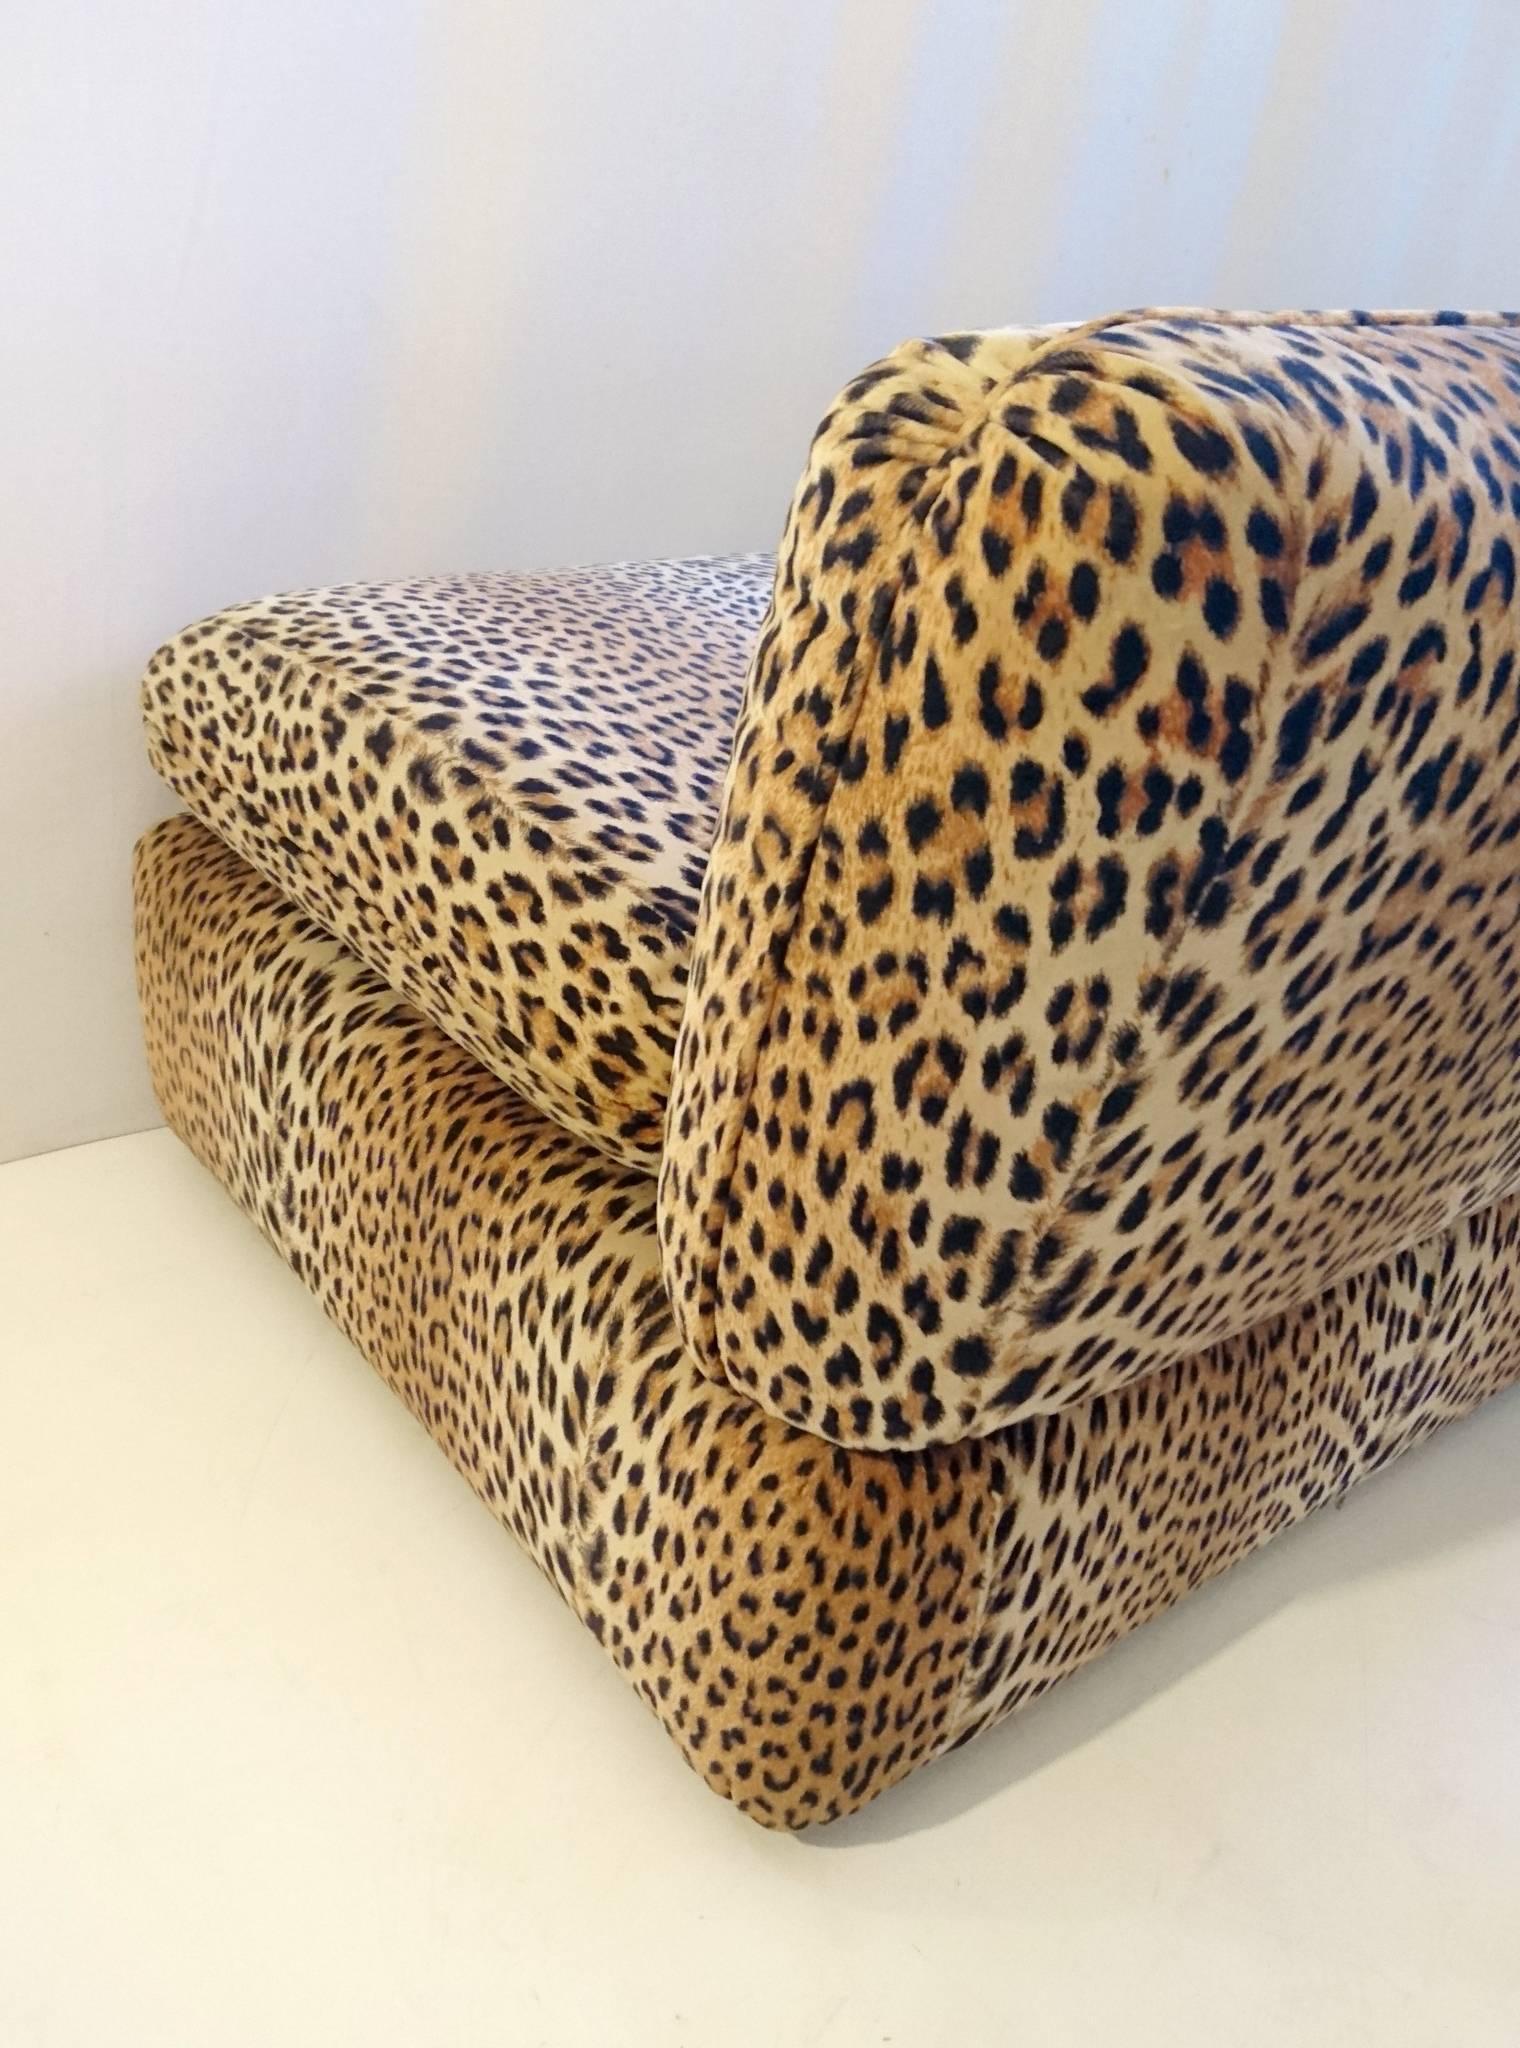 Late 20th Century Vintage Sofa in Leopard Velvet by Cyrus Company Italy